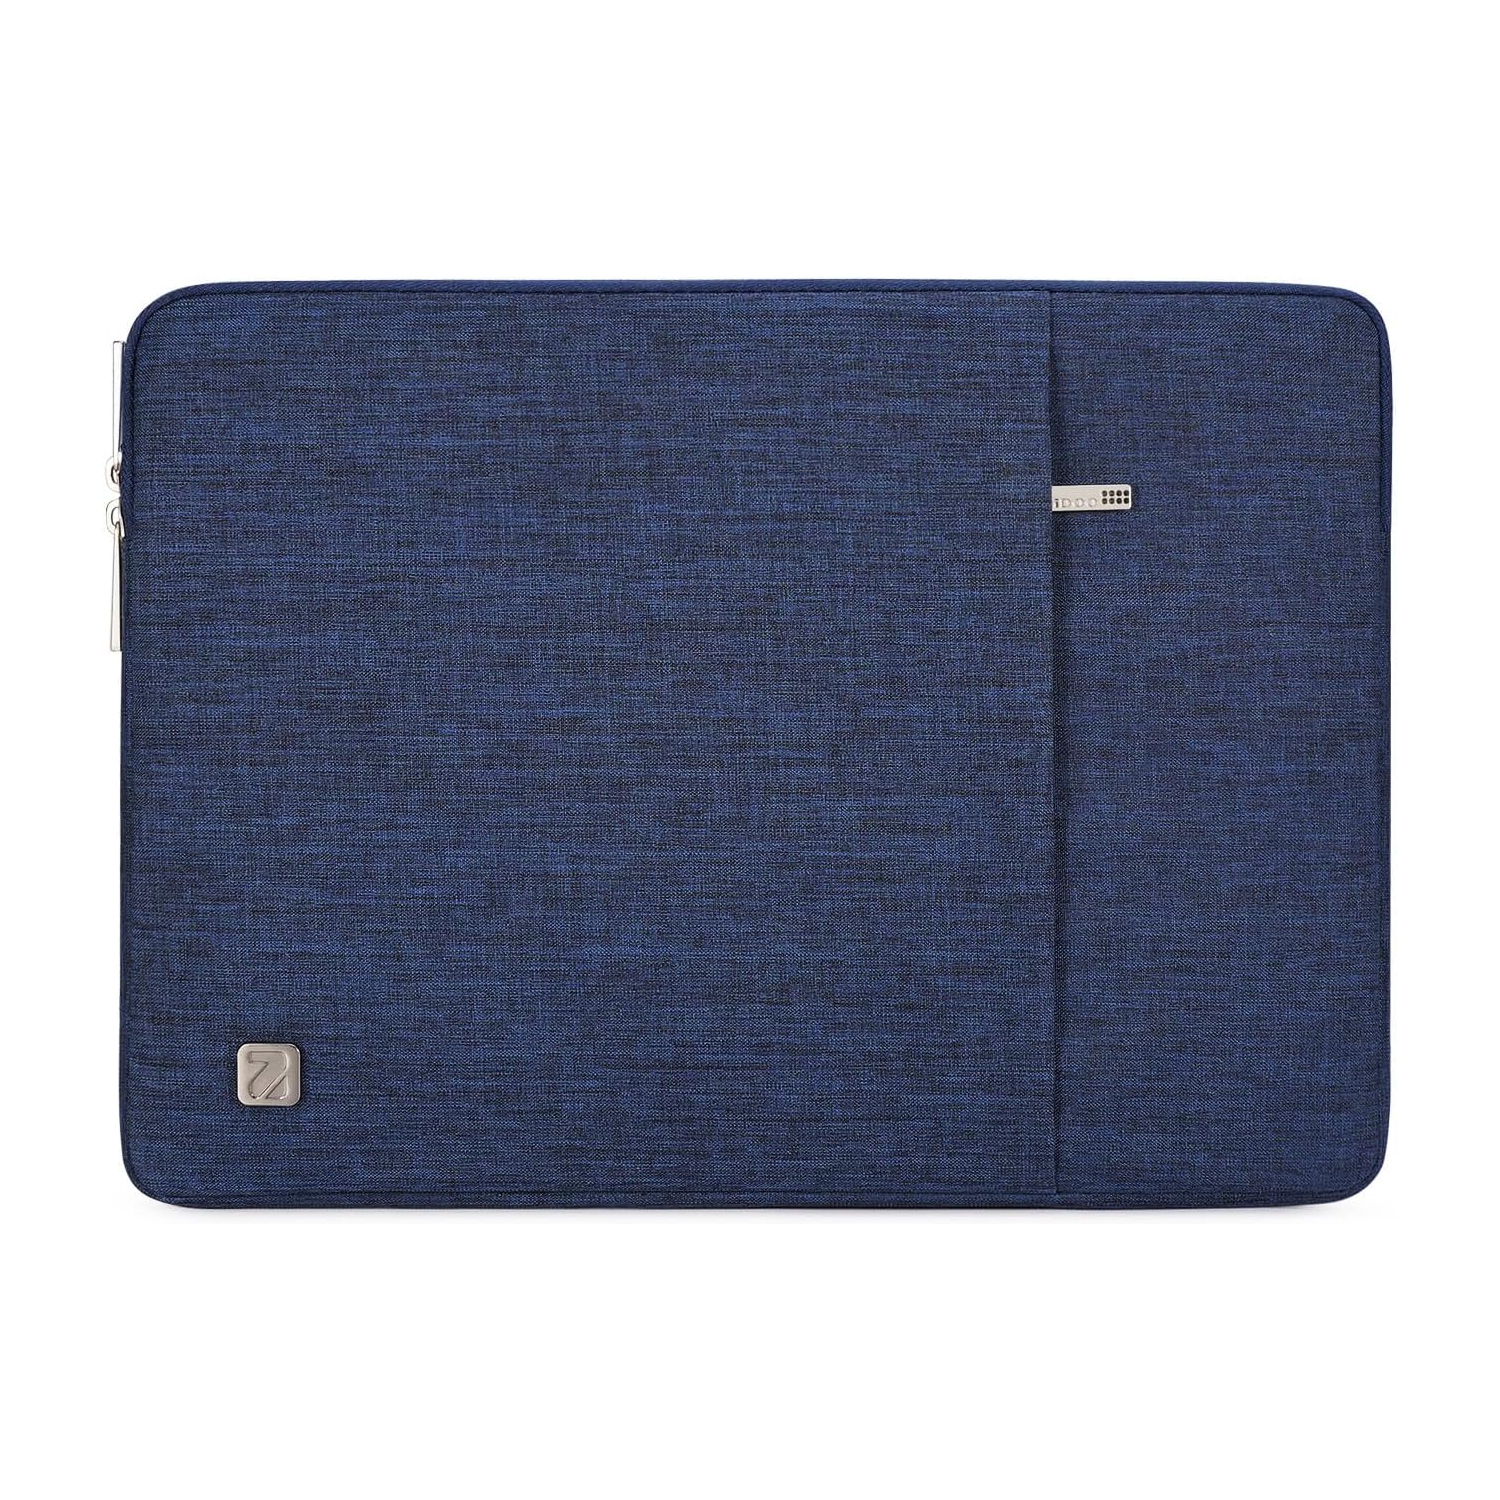 Laptop Sleeve 15 inch Computer Bag Case for 16" MacBook Pro M1 Pro / M1 MAX / 15" Surface Laptop 3 / Surface Book